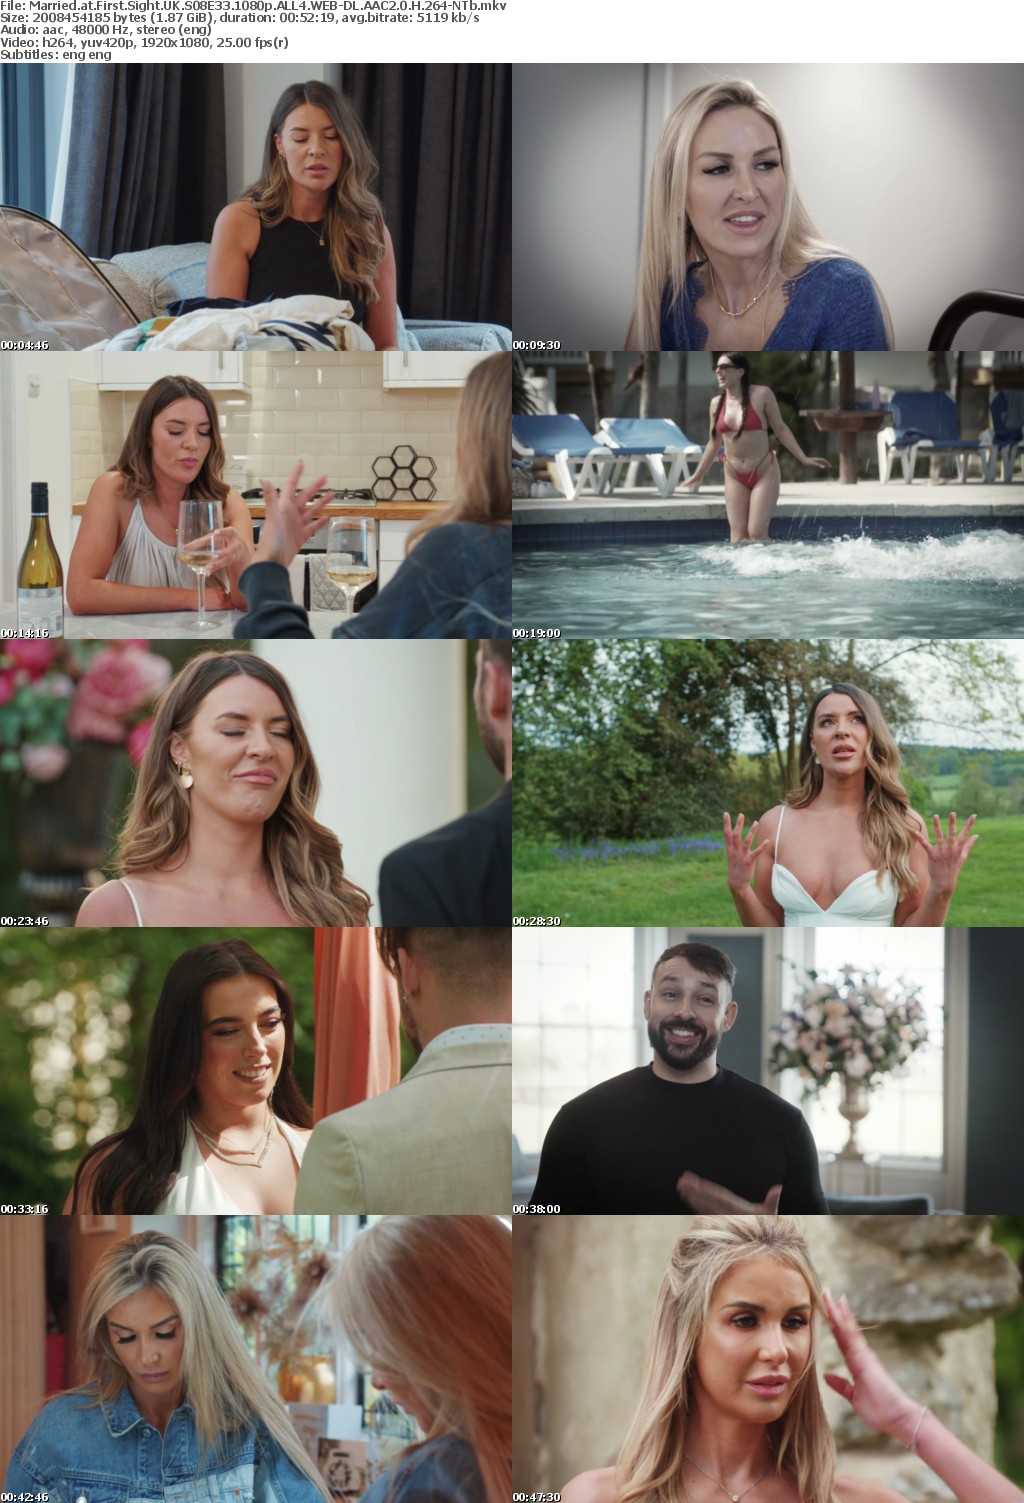 Married at First Sight UK S08E33 1080p ALL4 WEB-DL AAC2 0 H 264-NTb